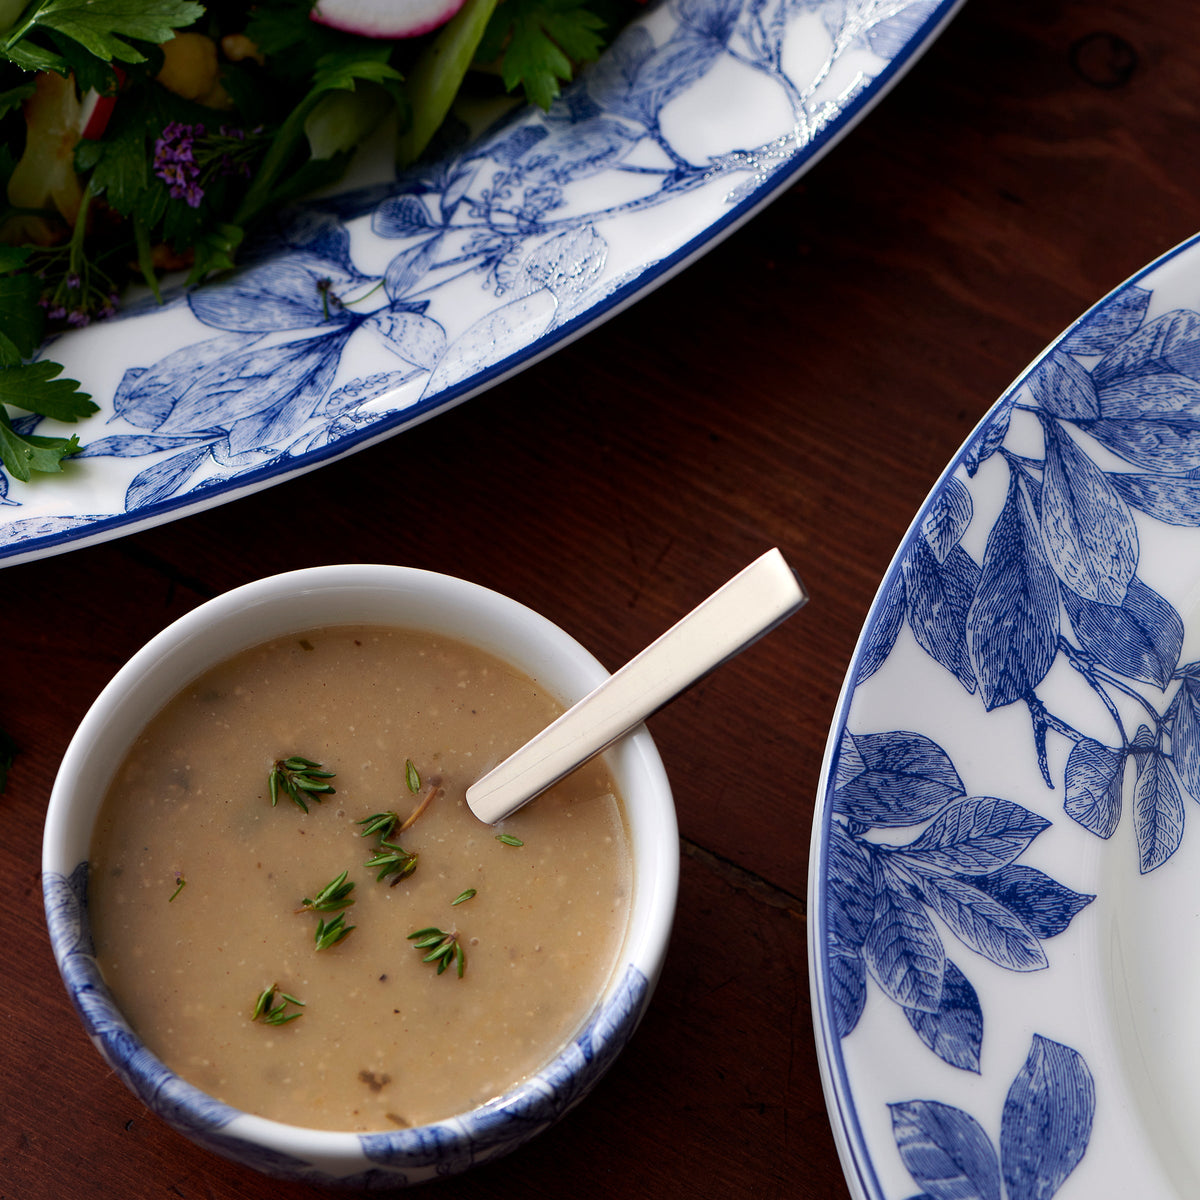 A small bowl of creamy soup garnished with herbs, placed next to a Caskata Artisanal Home Arbor Snack Bowl adorned with blue floral patterns and leafy branches on a wooden table.